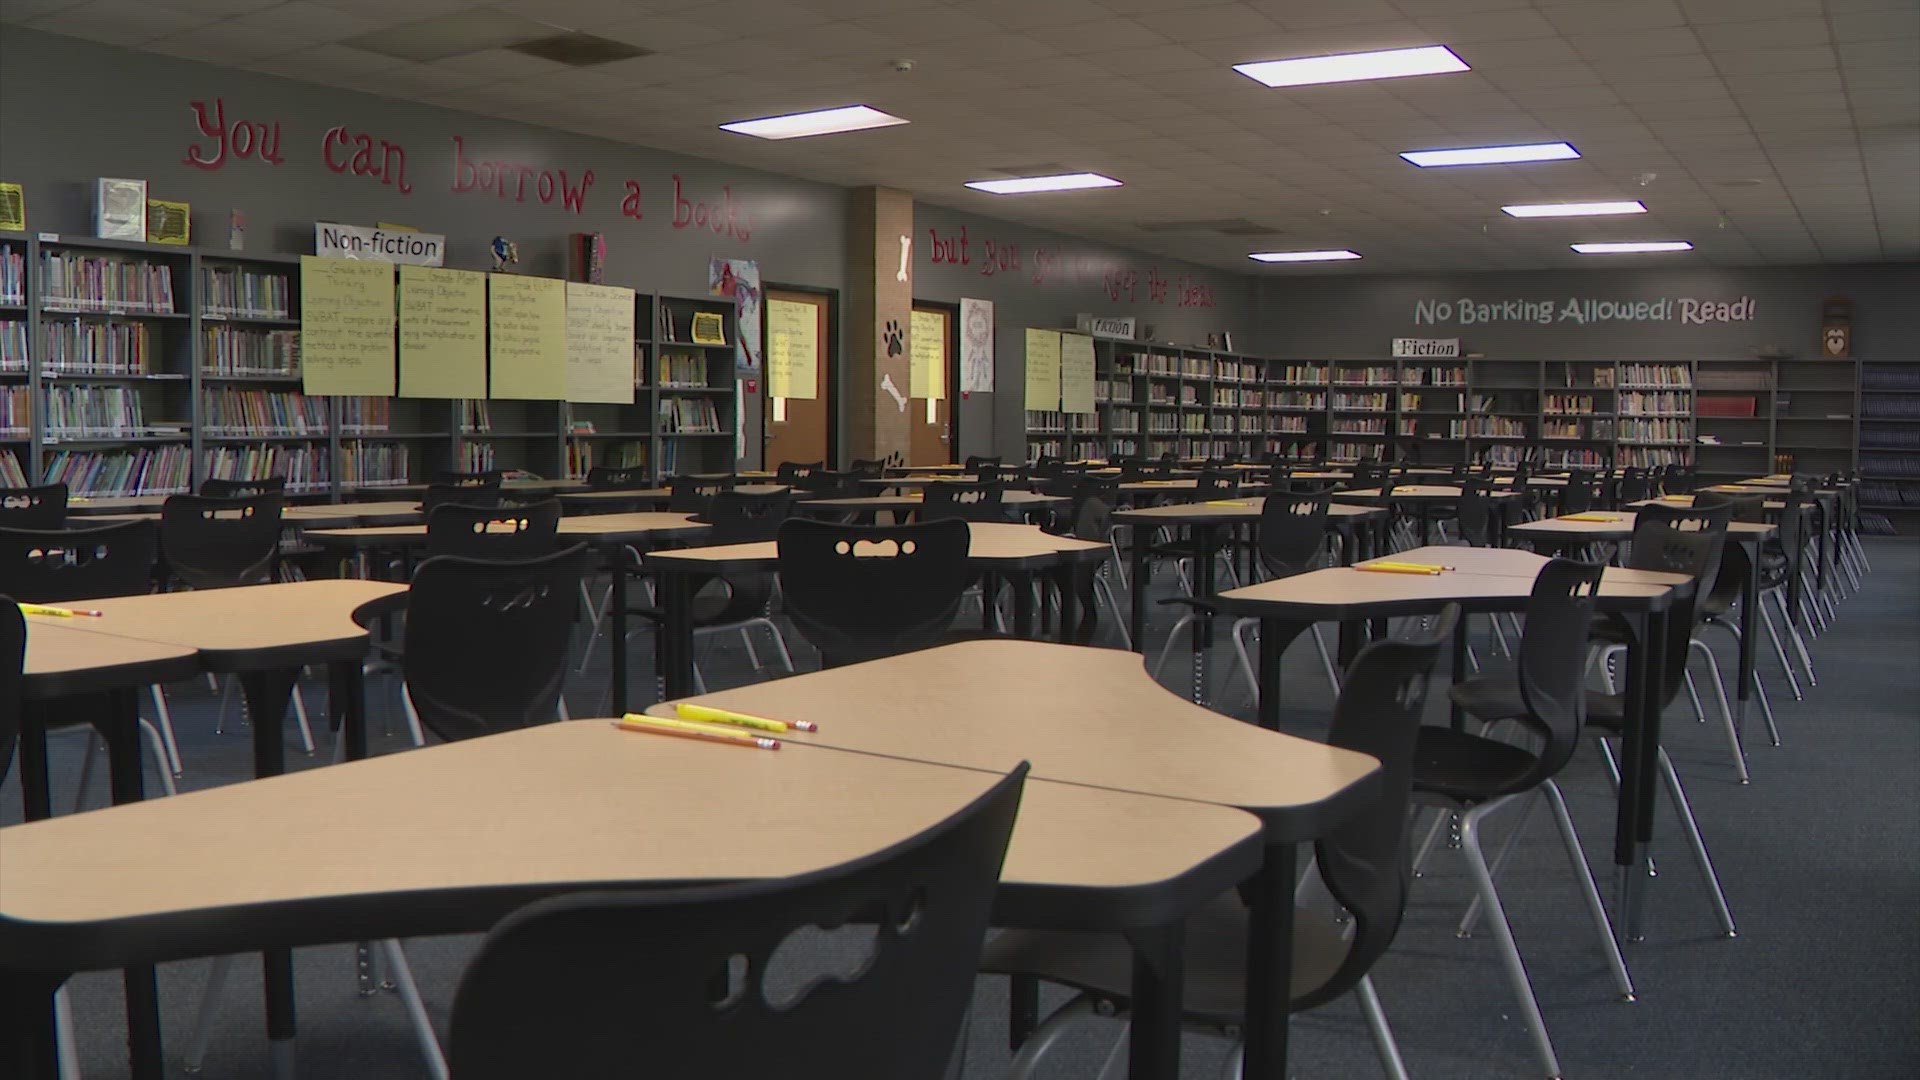 We got a look inside what used to be the library and several classrooms at Forest Brook Middle School.